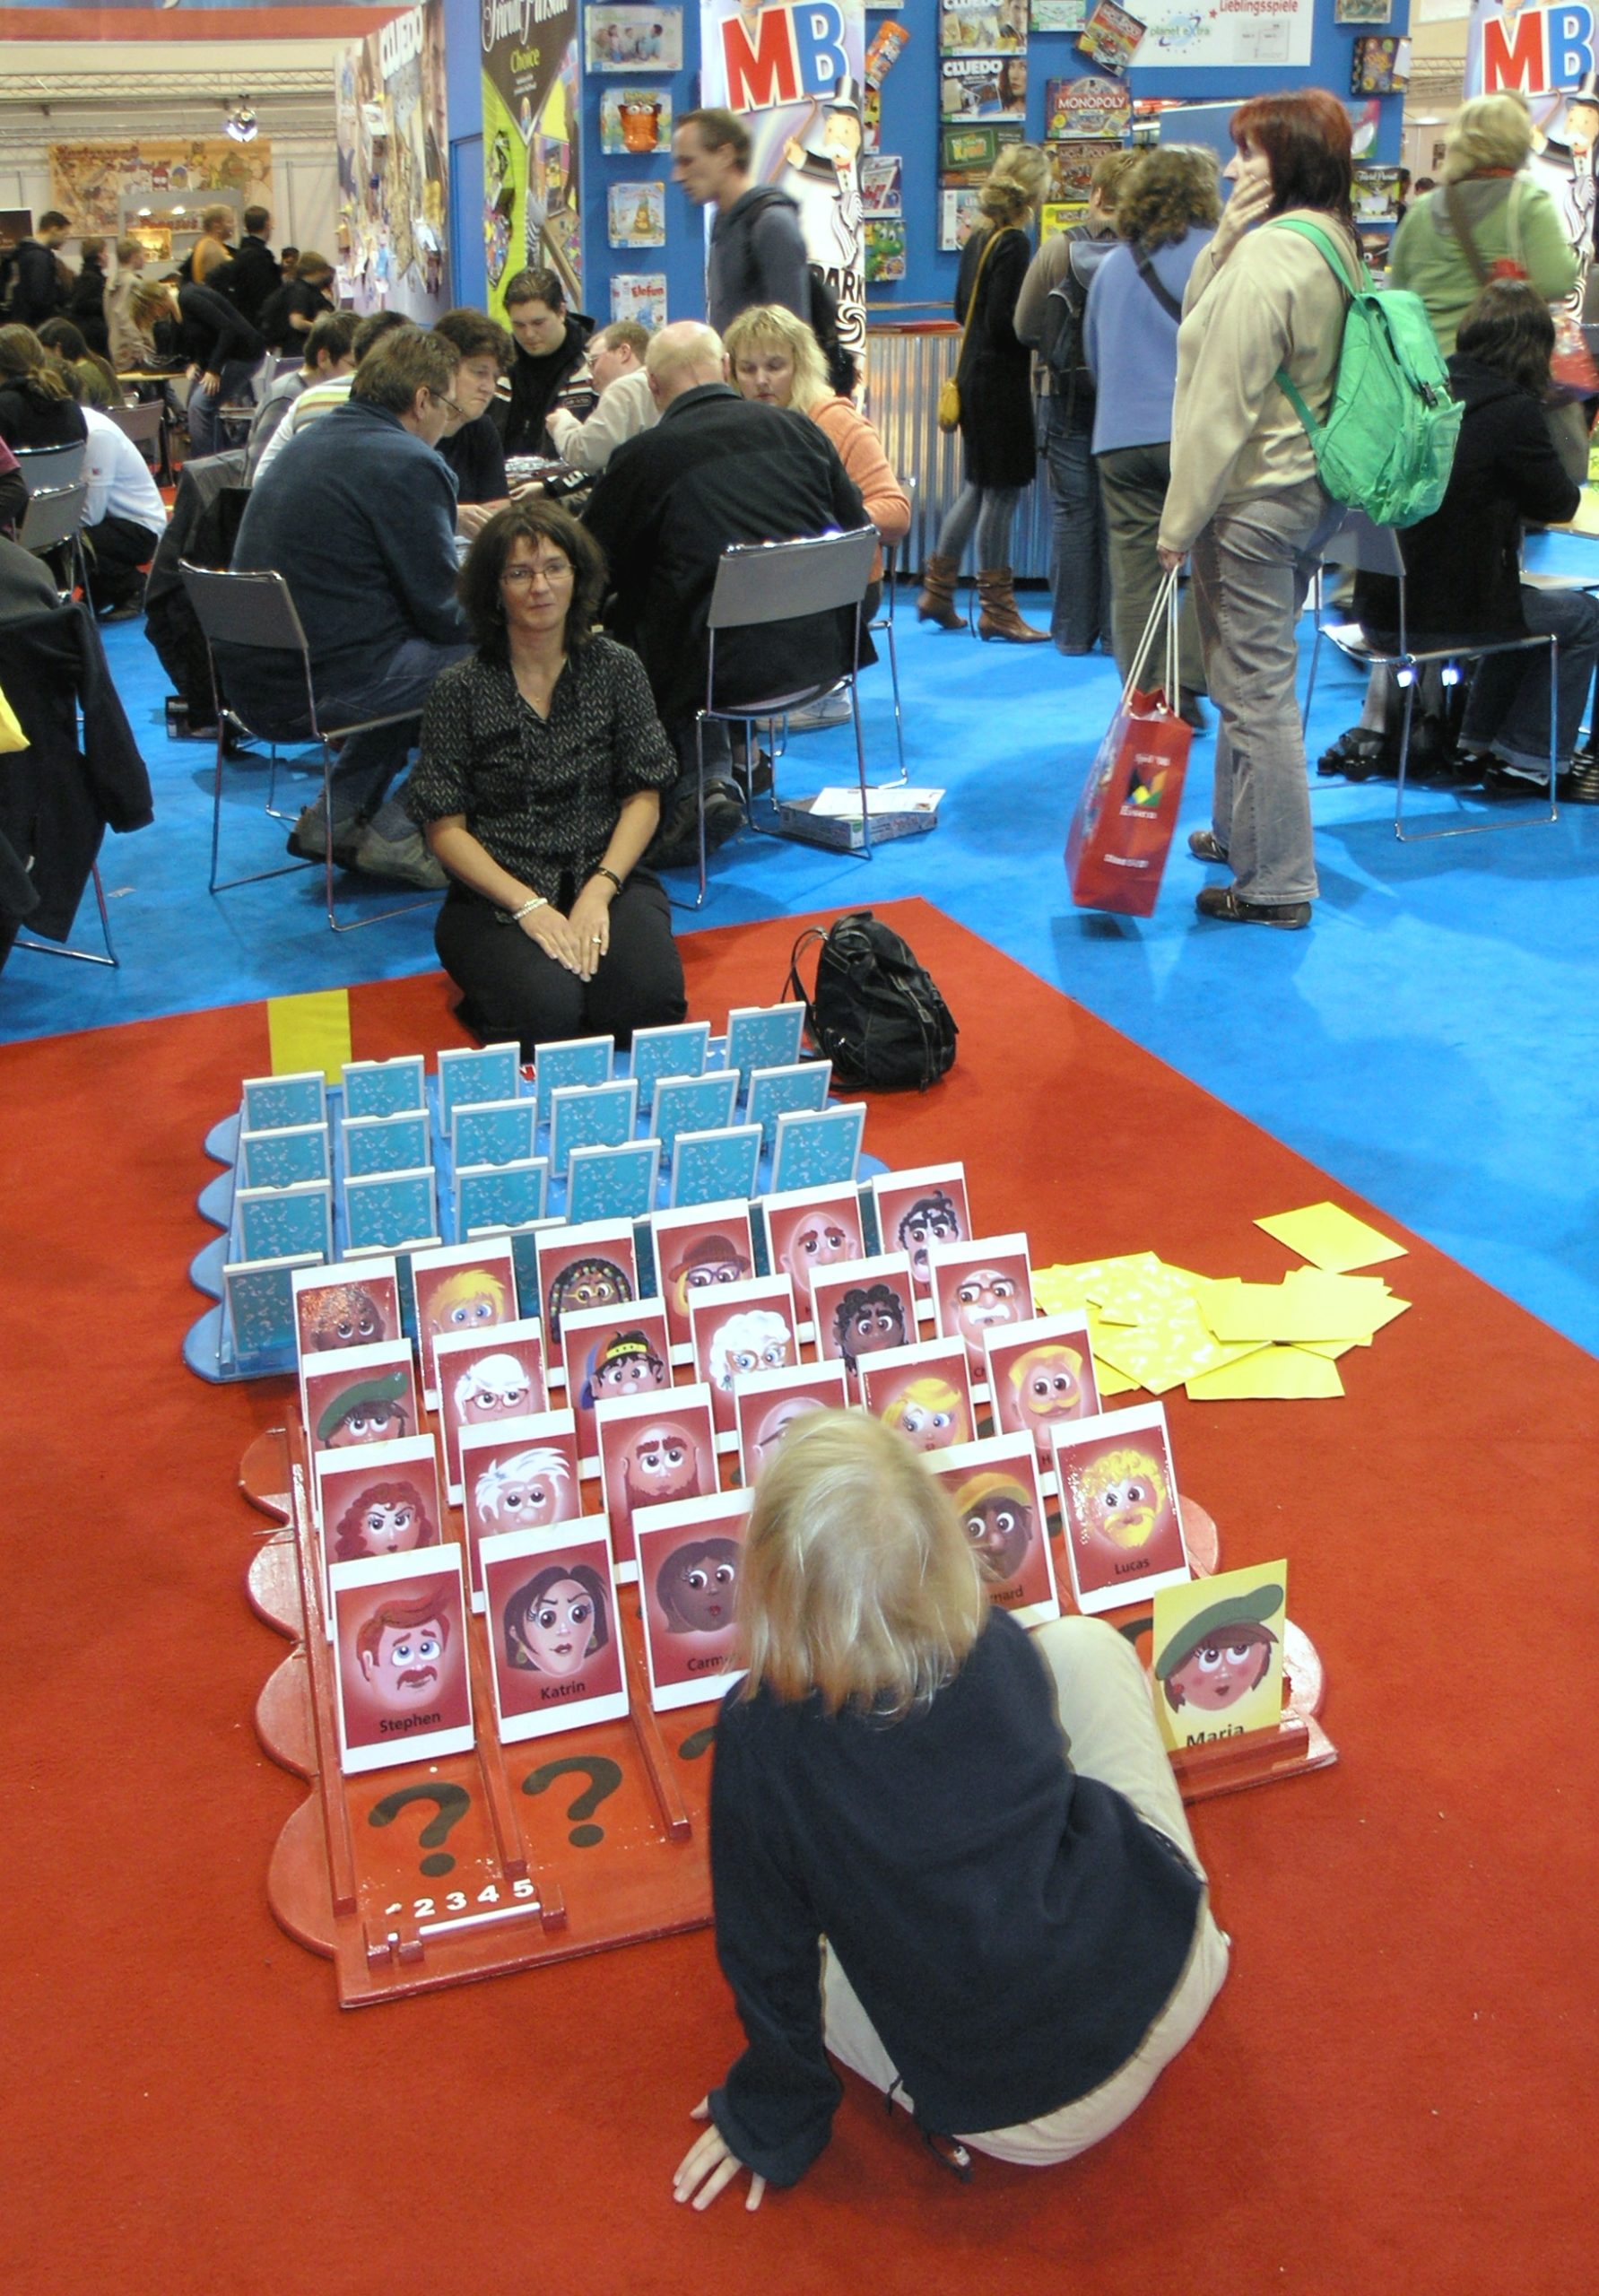 A giant-sized game of Guess Who